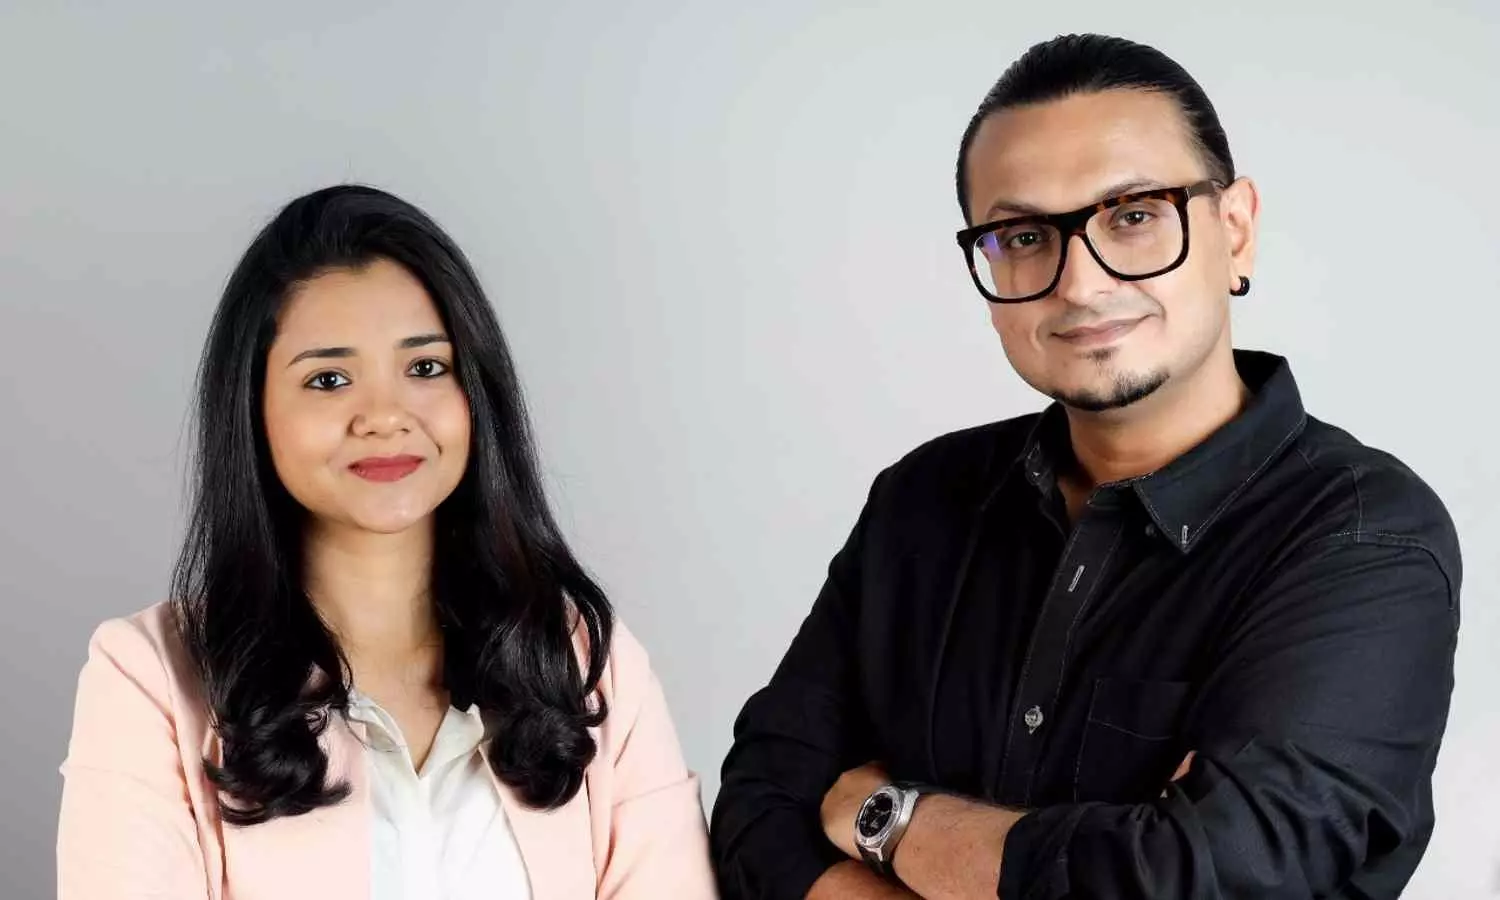 Pragya Mittal, Co-Founder and CMO and Devrishi Arora, Founder and CEO of EVIFY